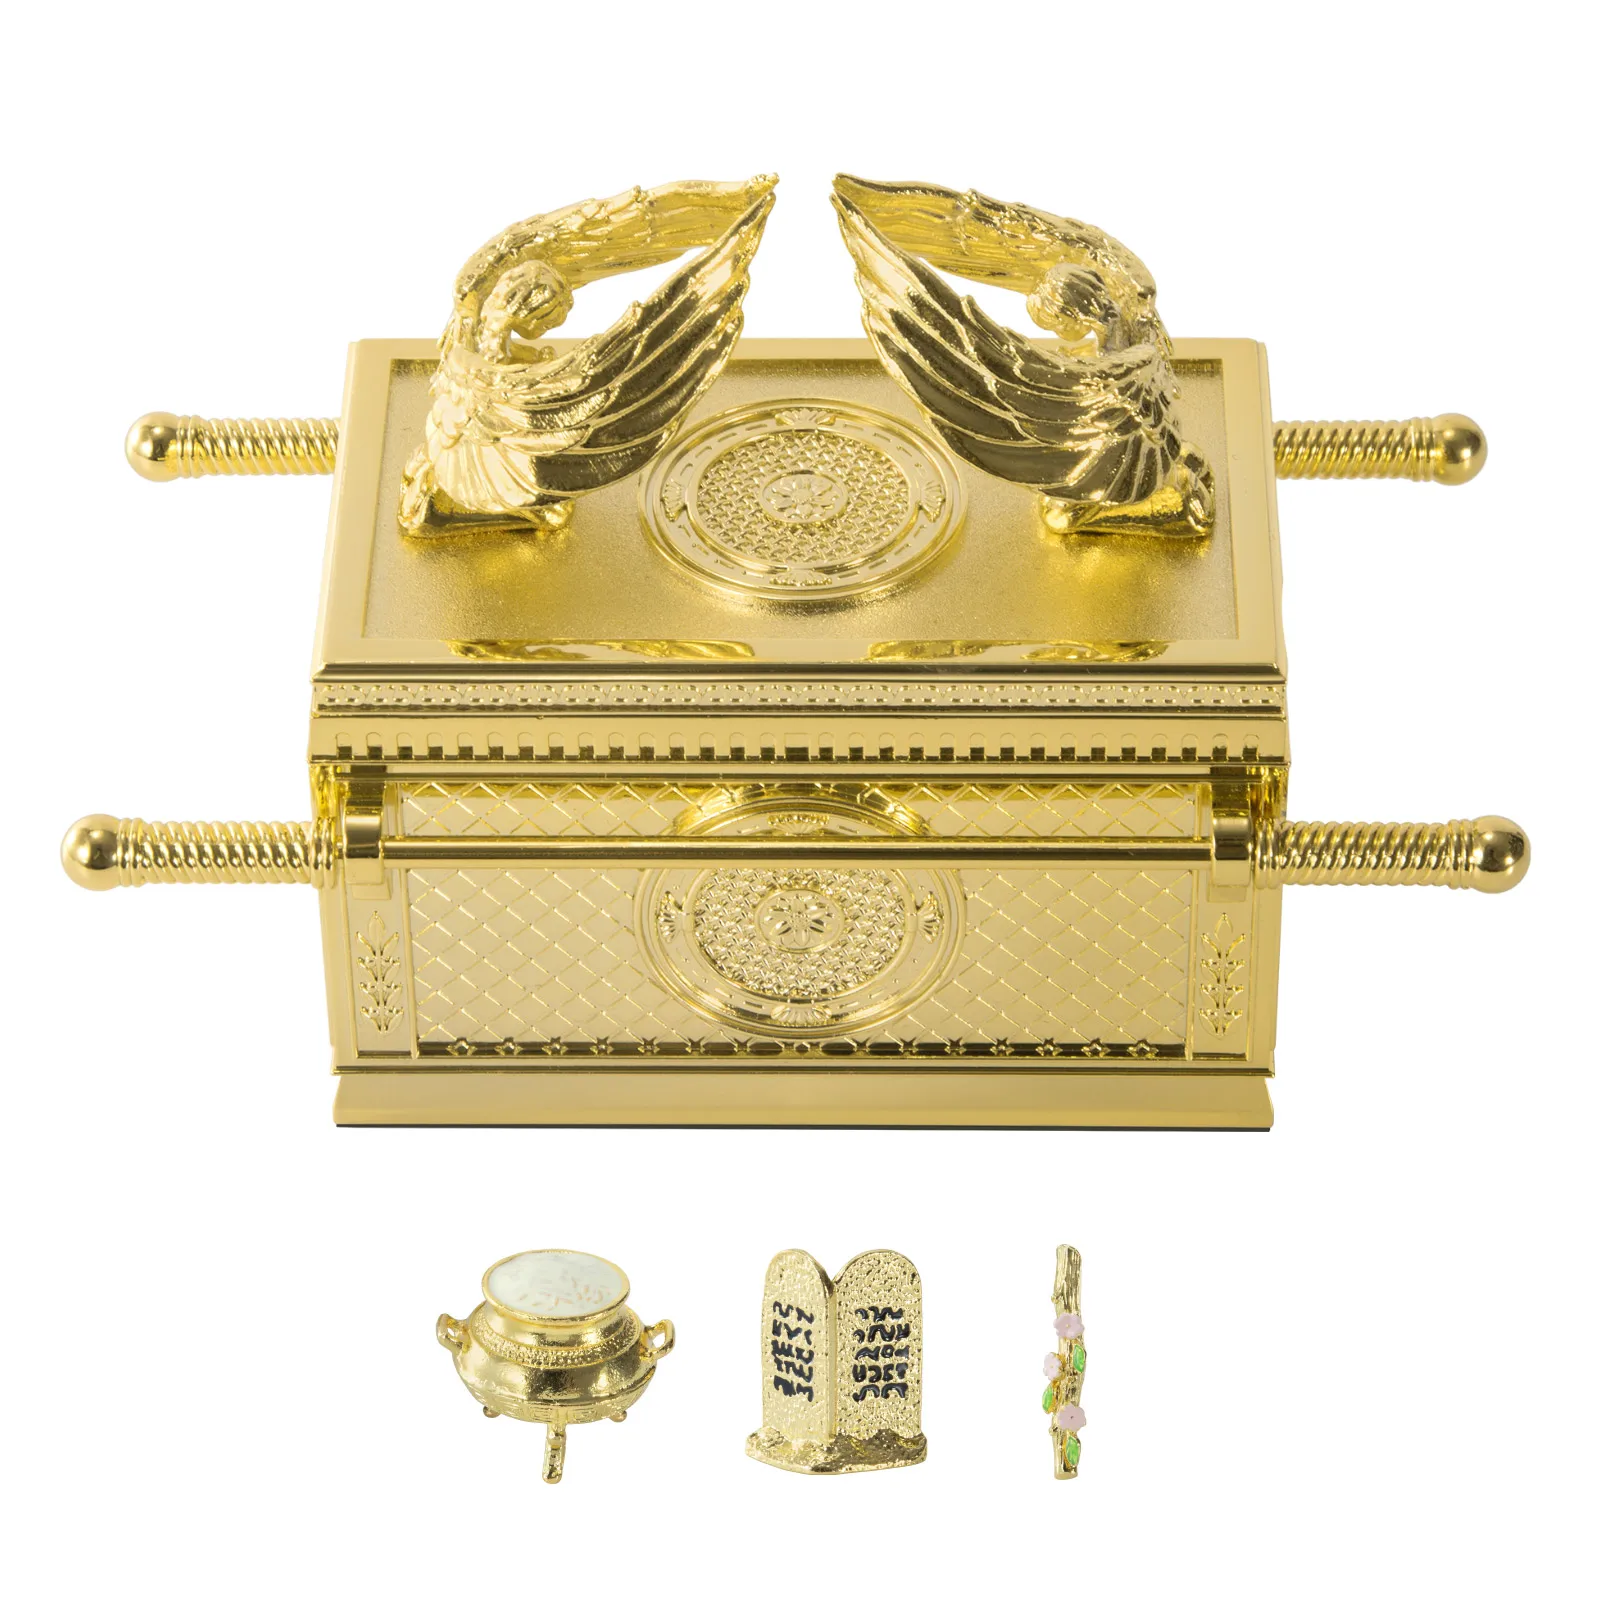 

BRTAGG The Ark of The Covenant Historic Model Replica with contents, Gold Plated Religious Decorative